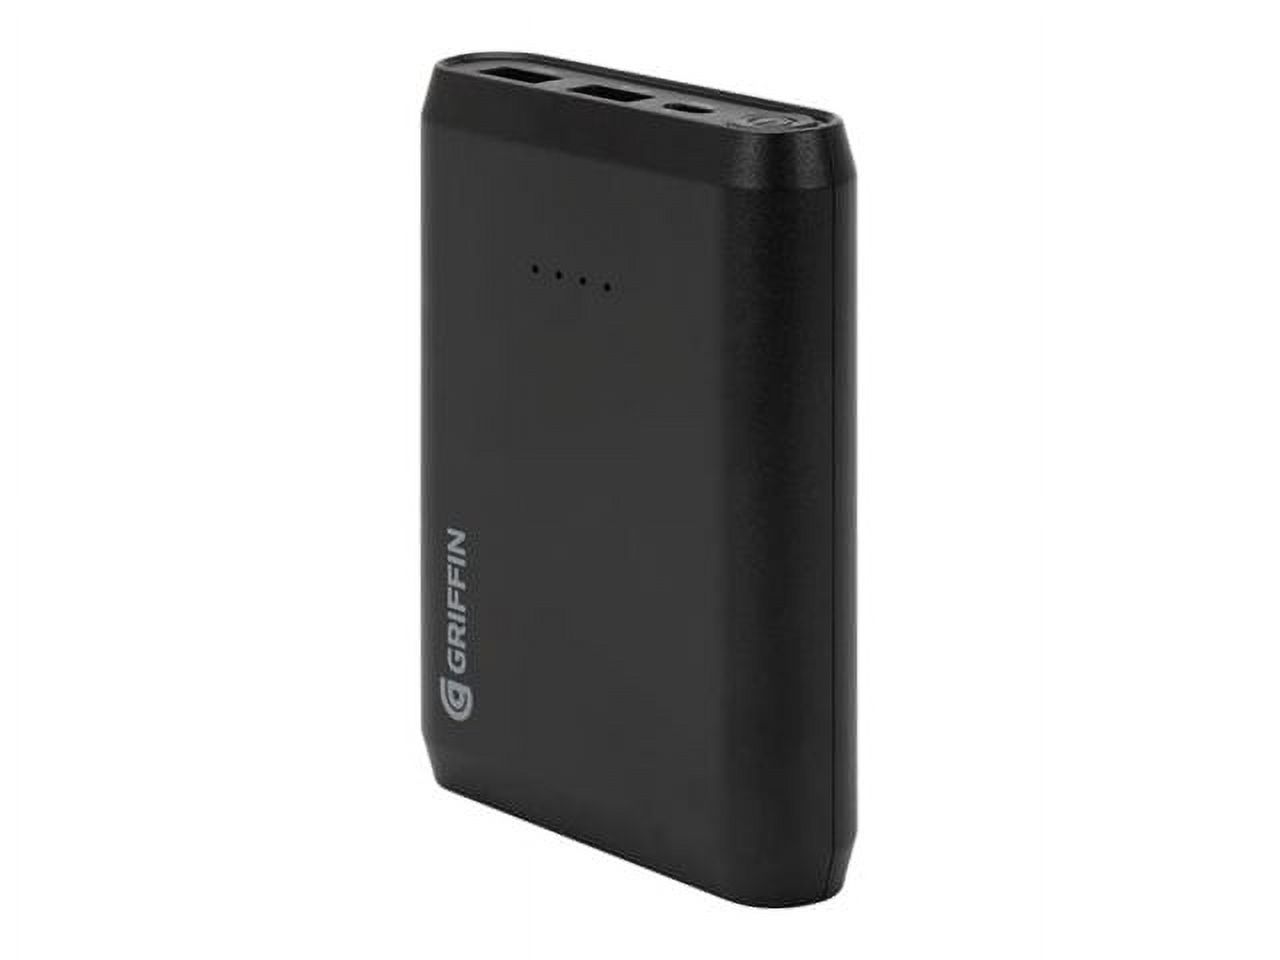 Griffin Reserve Power Bank, 6000mAh, Black - image 1 of 4